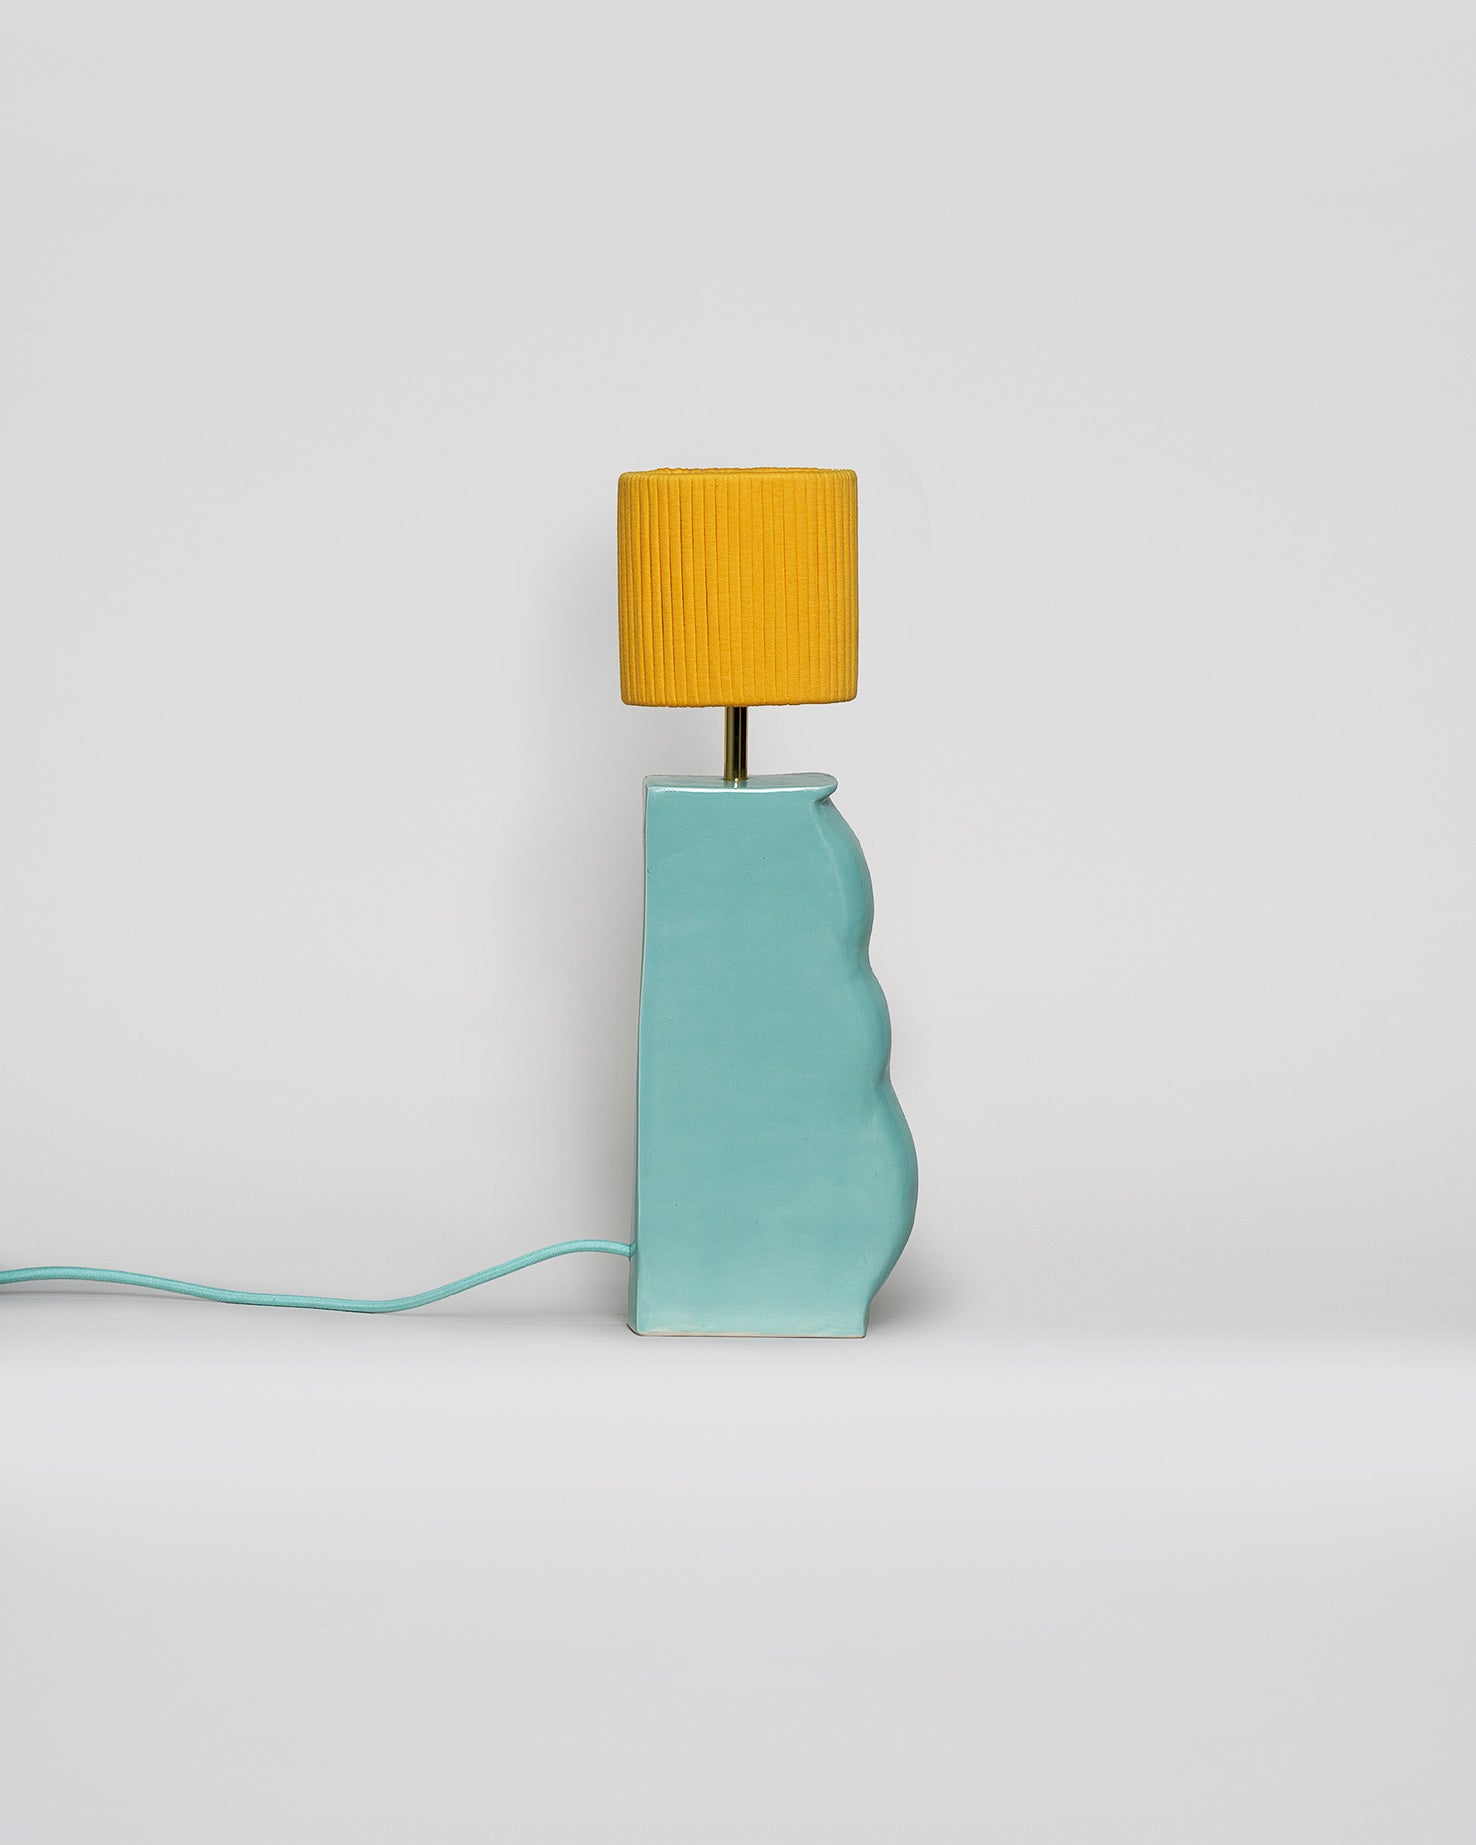 ceramic table lamp teal and yellow